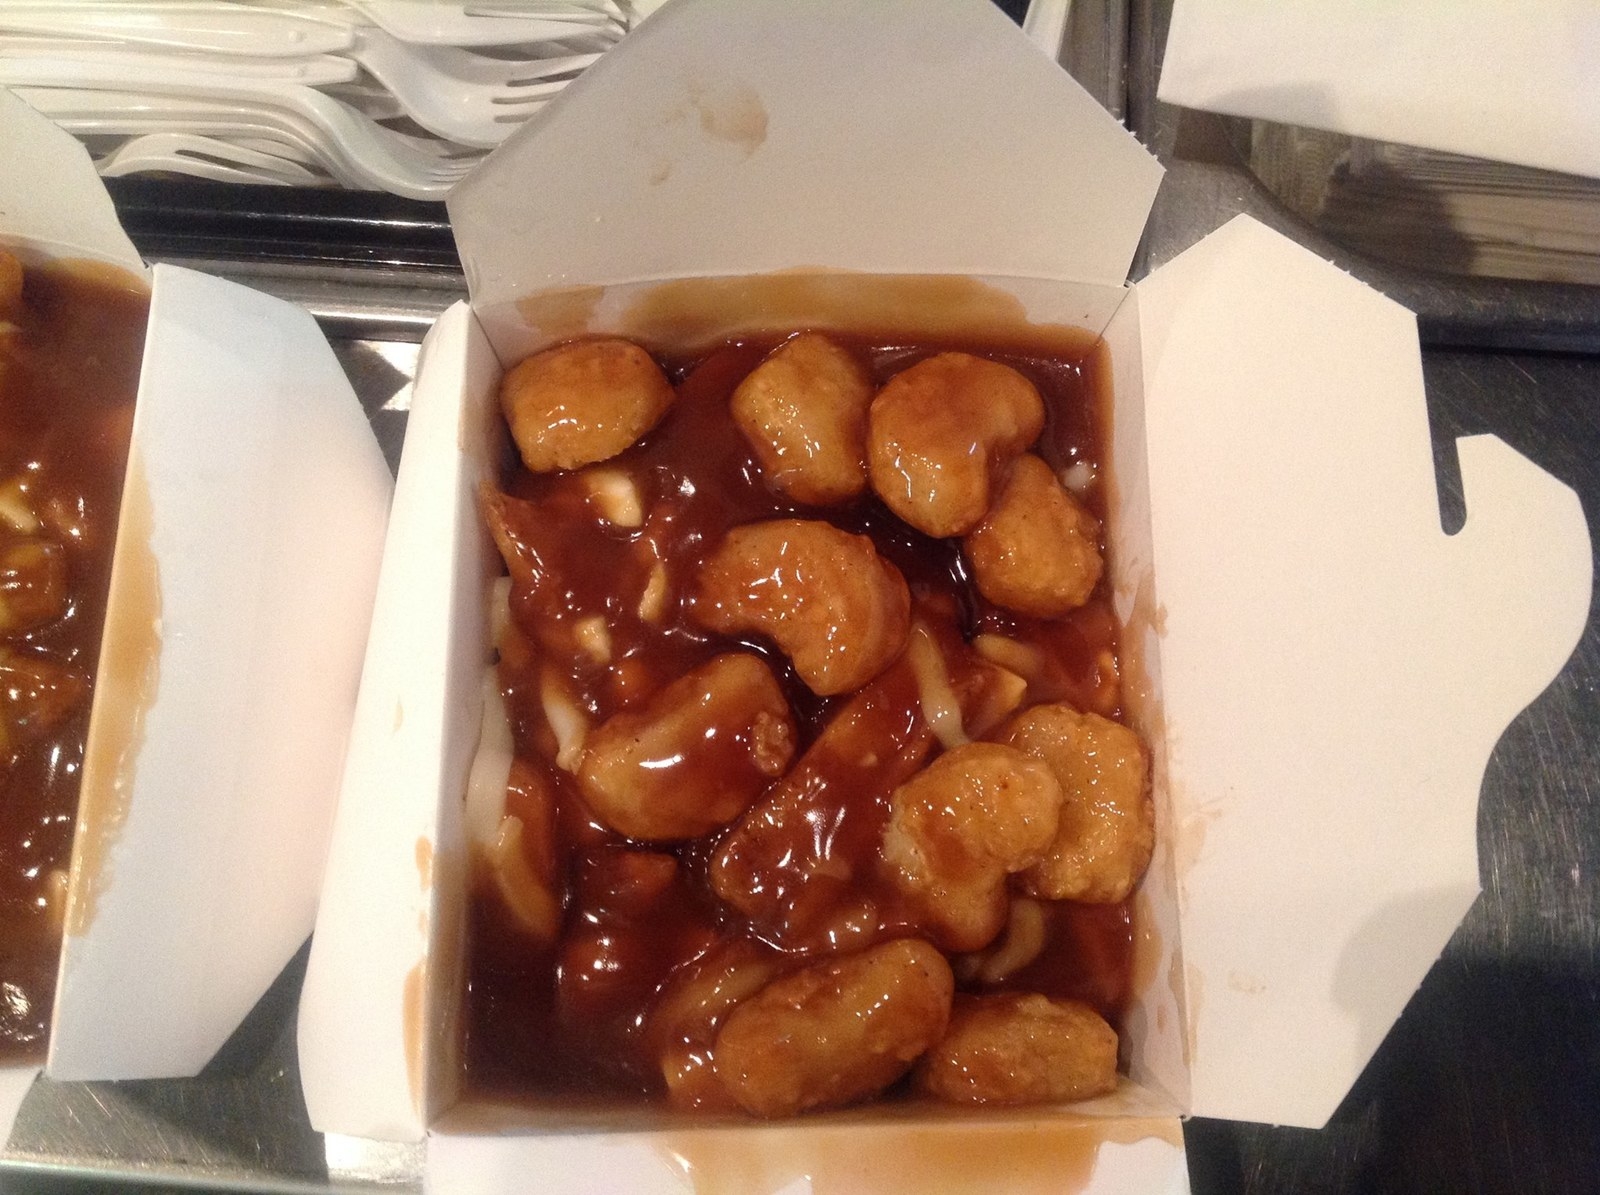 19 Of The Best Places To Get Poutine Across Canada